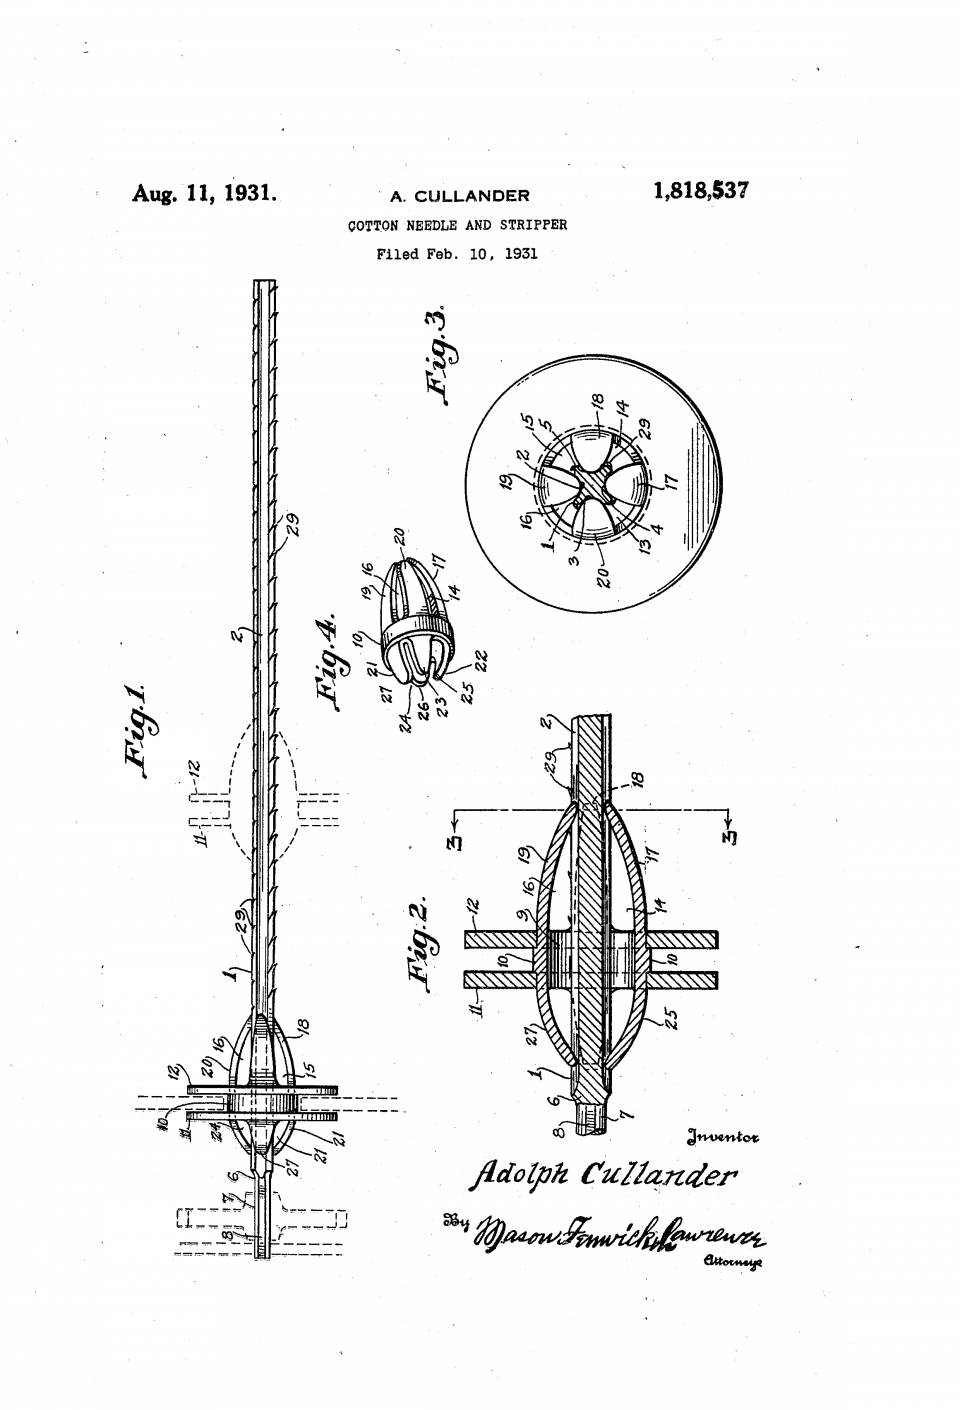 Adolph Cullander's second patent, granted in 1931 for his invention of a cotton needle and stripper.